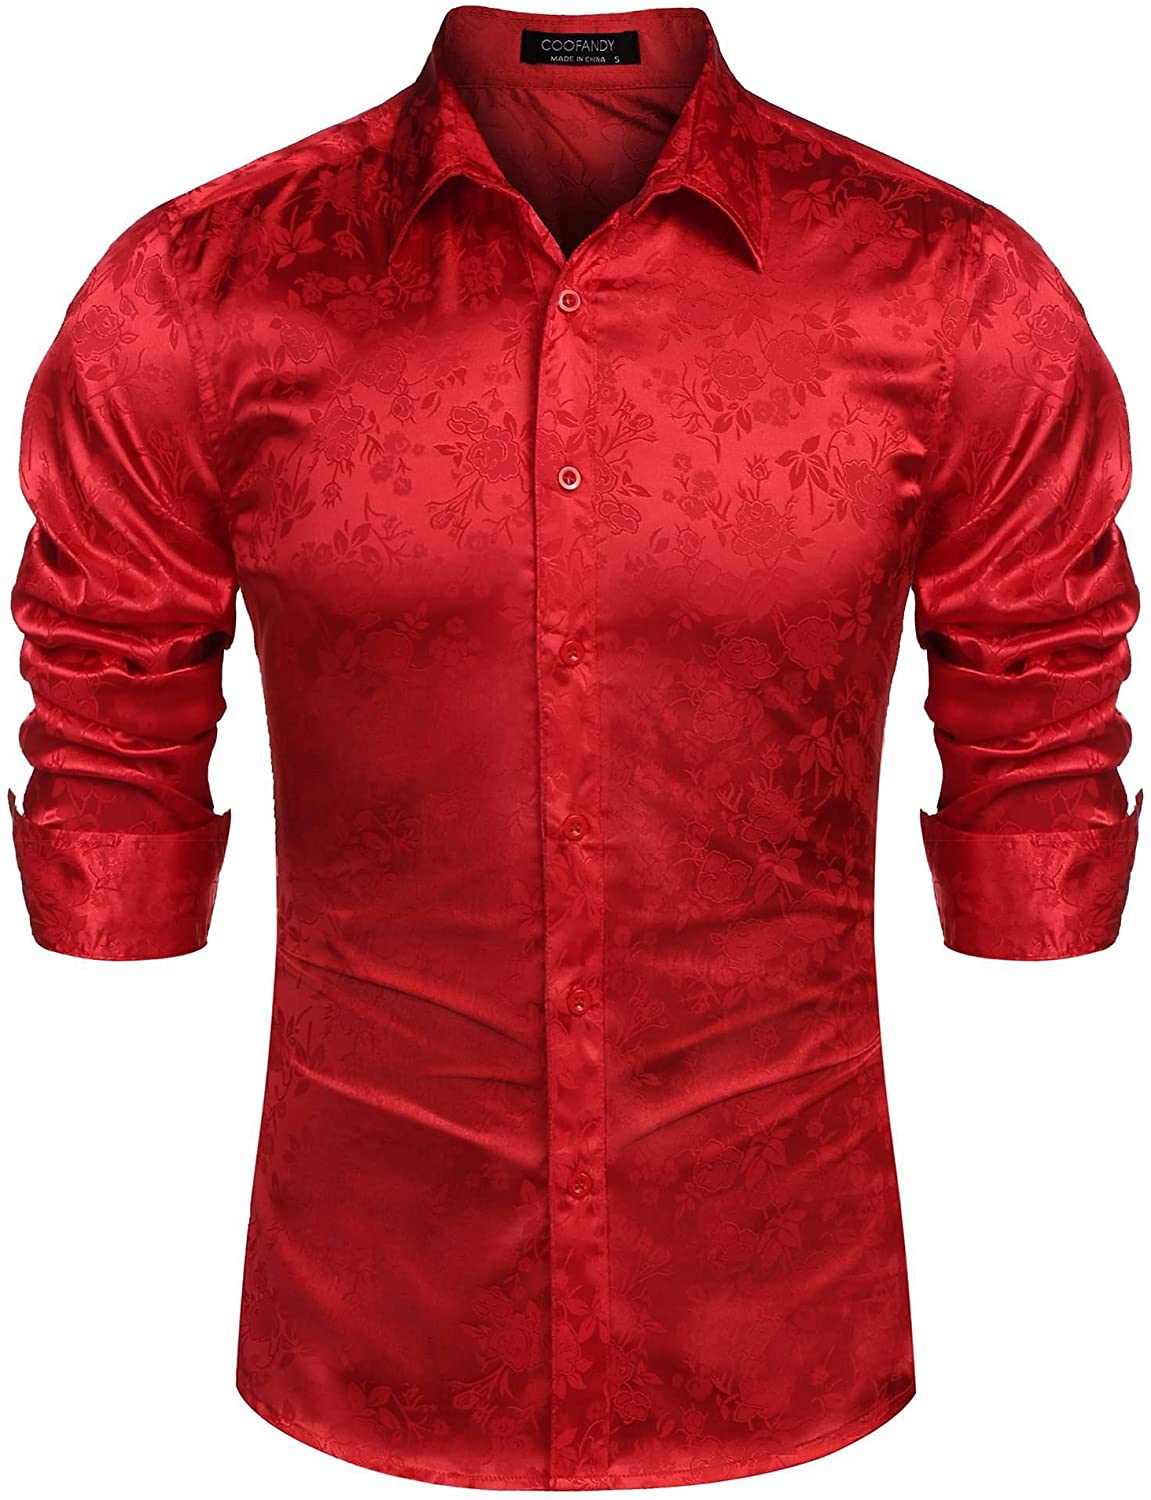 Mens Slim Fit Button Down Shirts Casual Rose Printed Tops Lapel Long Sleeve A310